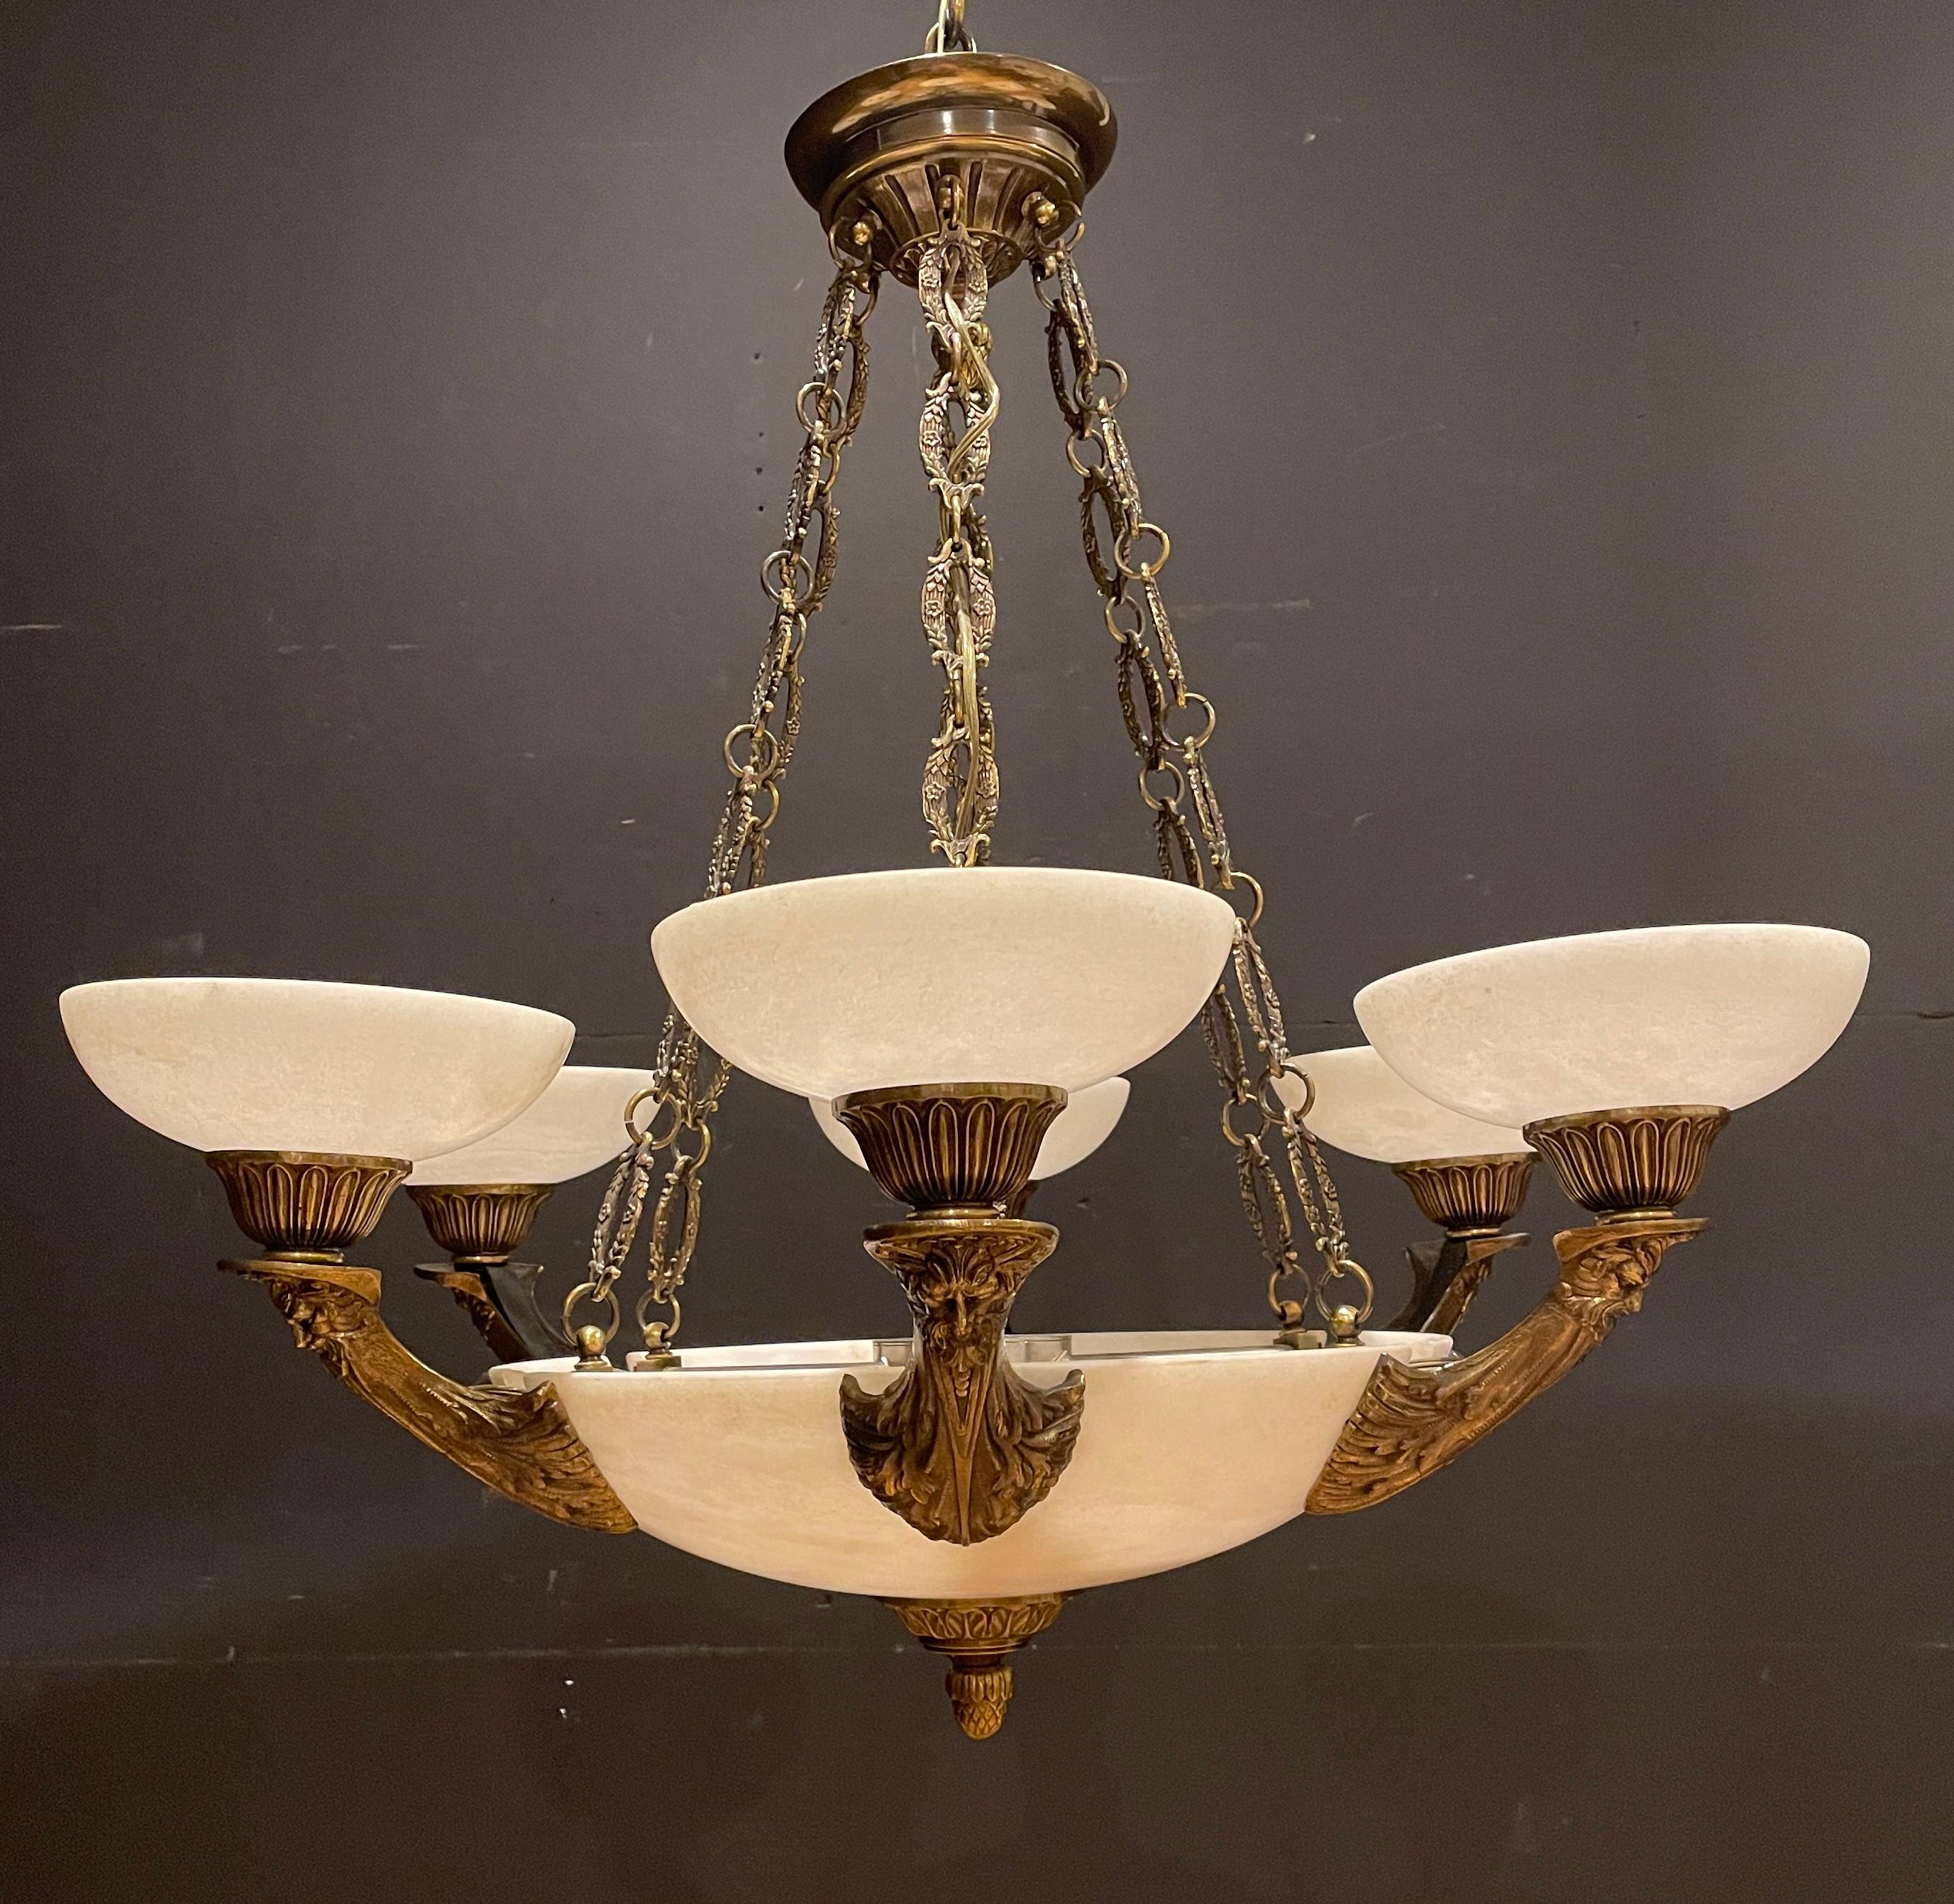 Fine quality white alabaster and patinated figural bronze chandelier. Center alabaster dome pendant supporting six bronze arms with Zeus form masks and alabaster dome shades.